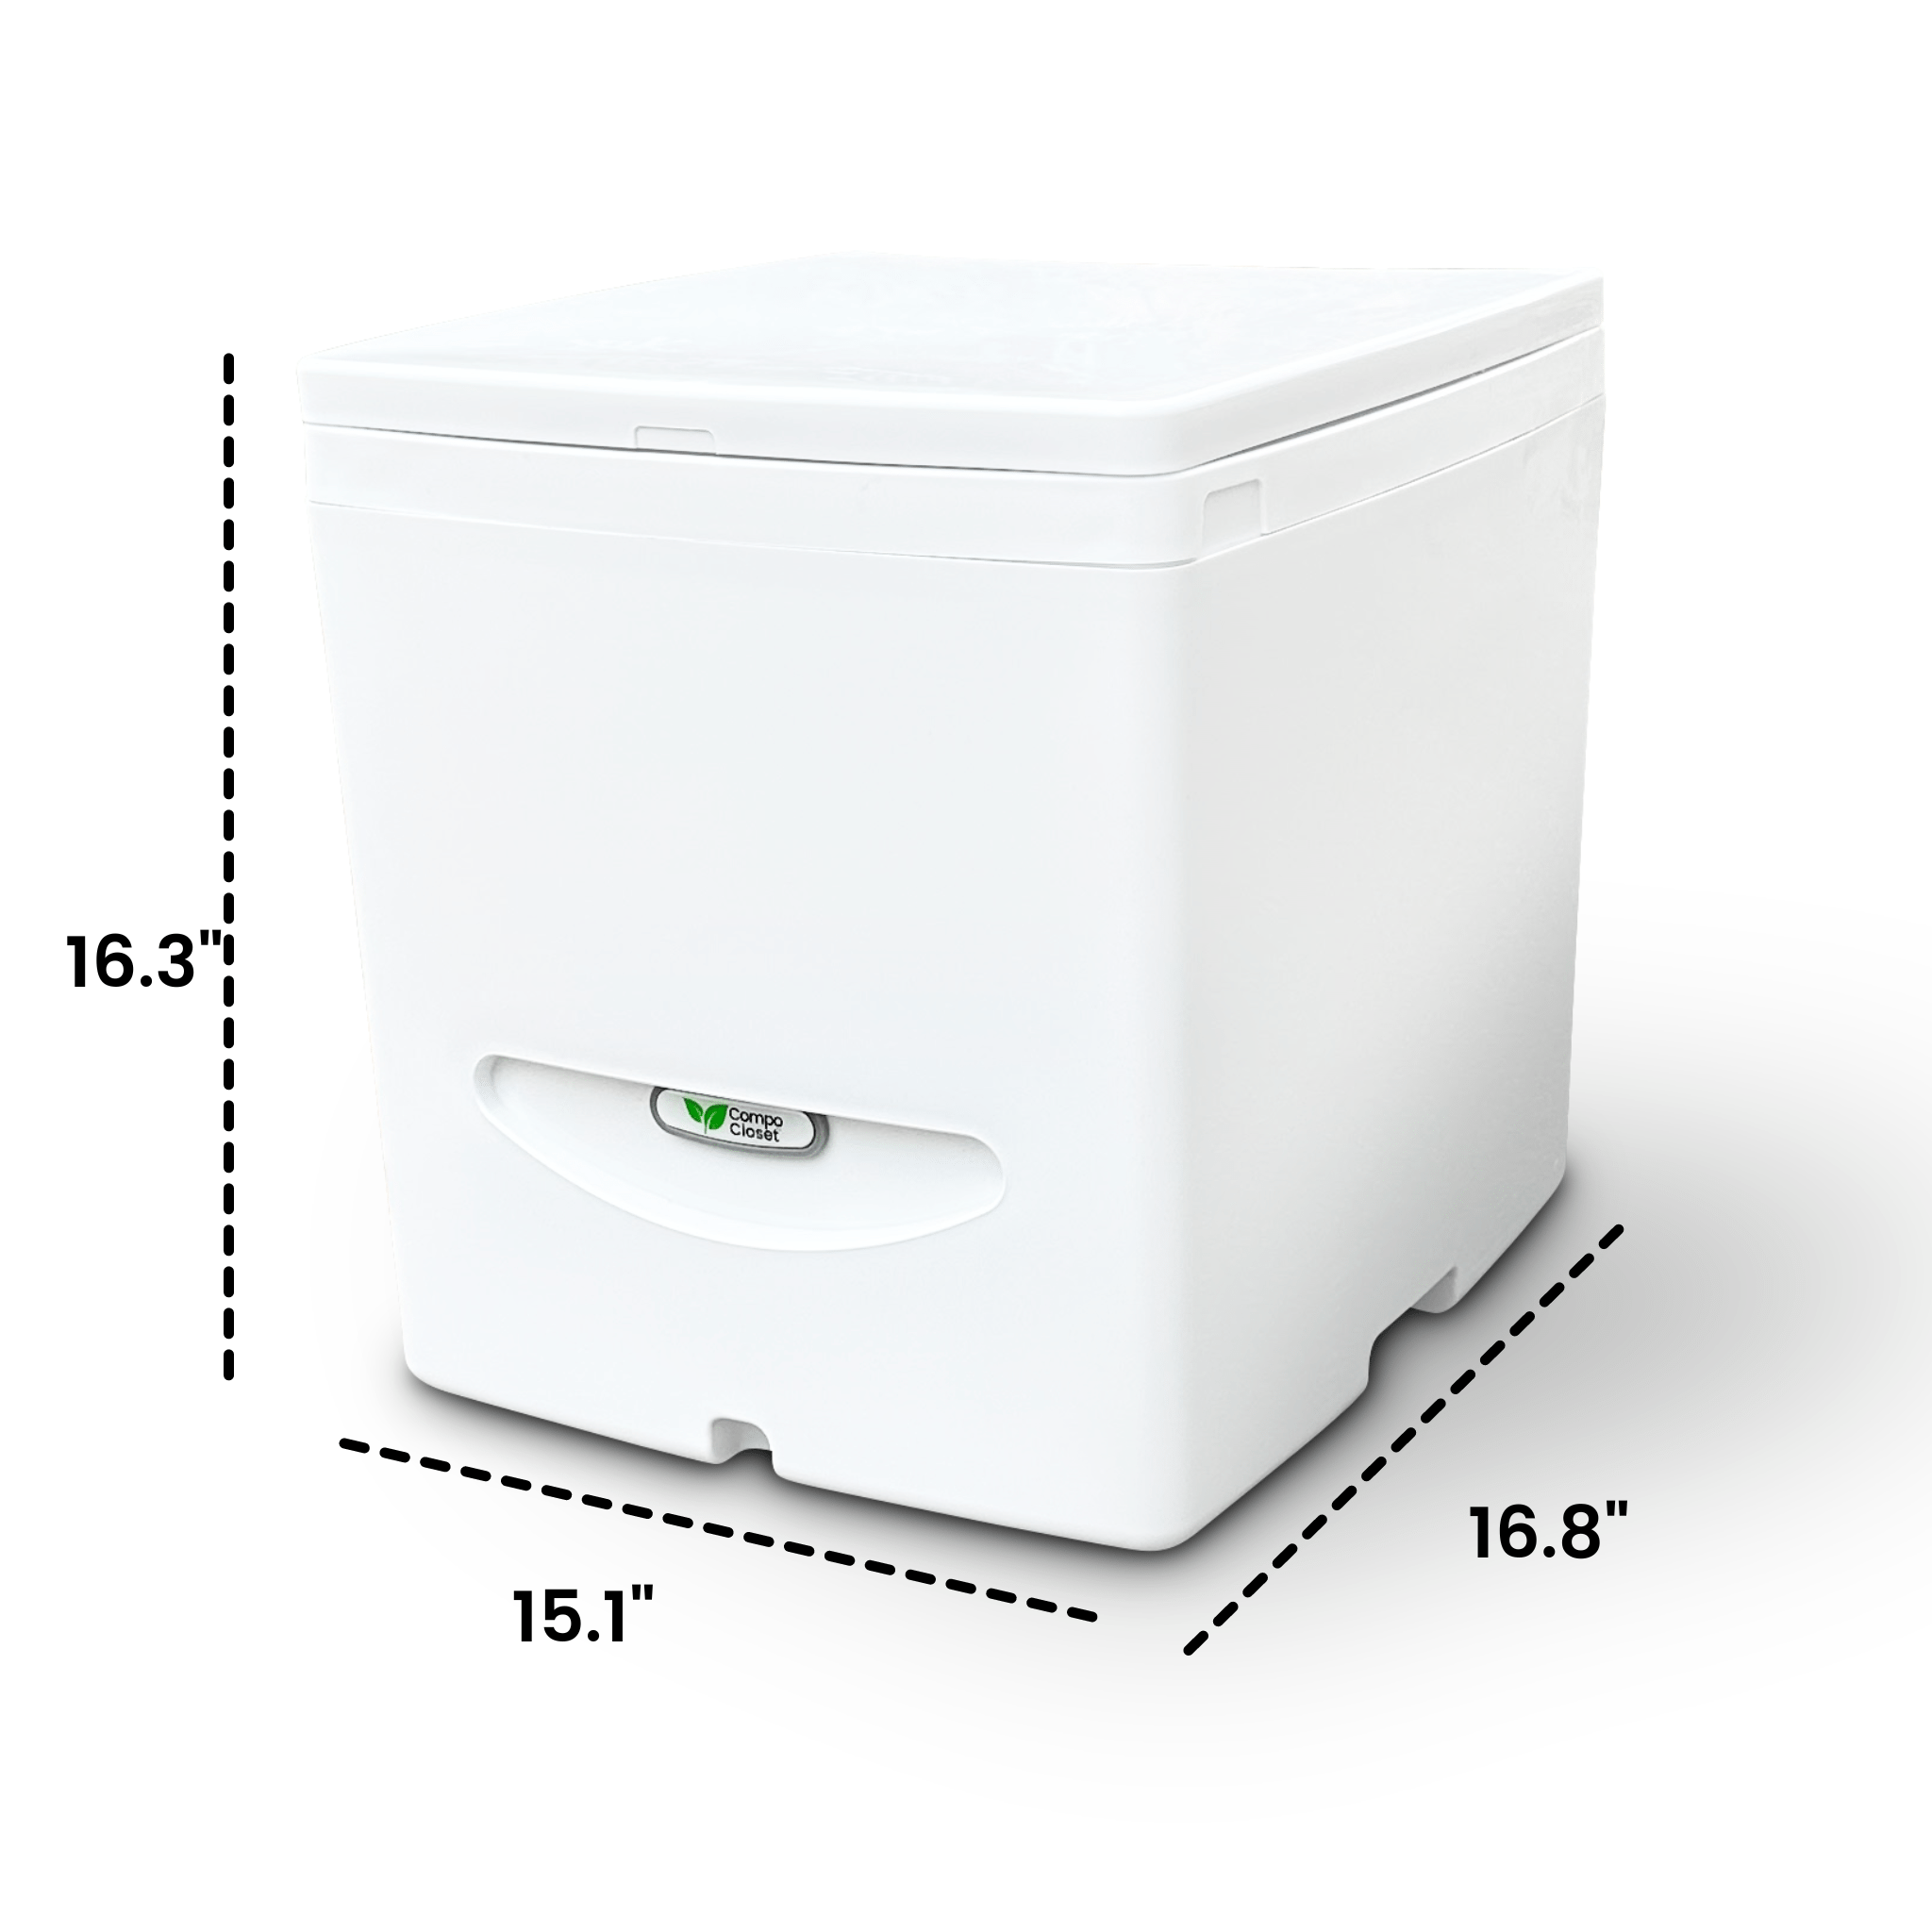 Cuddy Lite Composting Toilet Dimensions inches